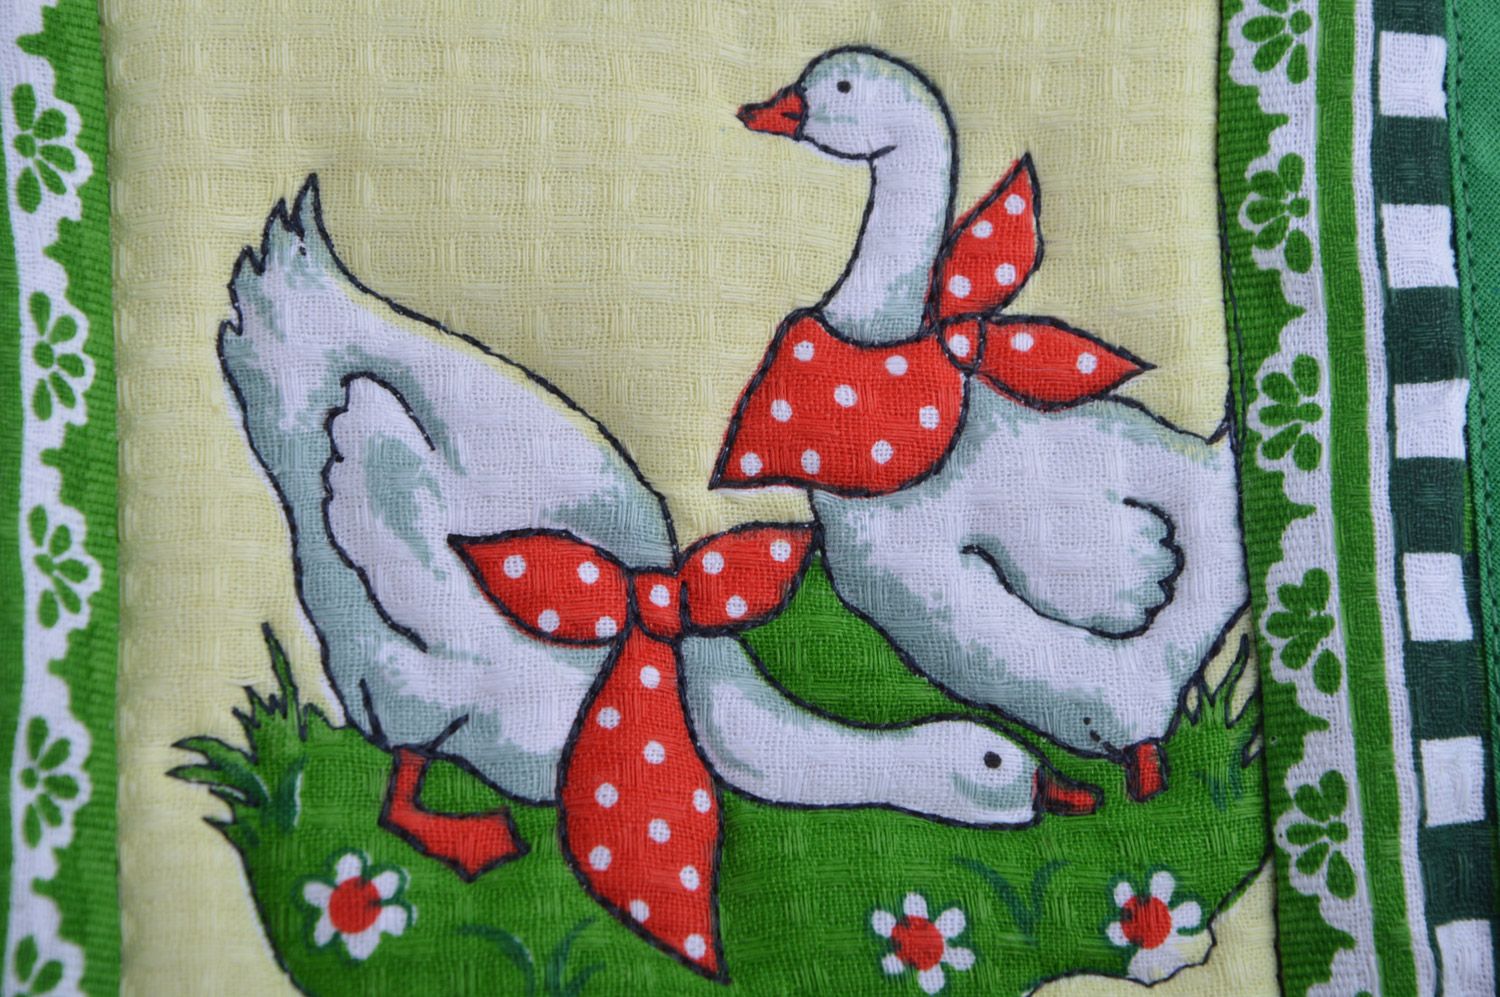 Handmade square pot holder sewn of cotton with geese image in green color palette photo 4